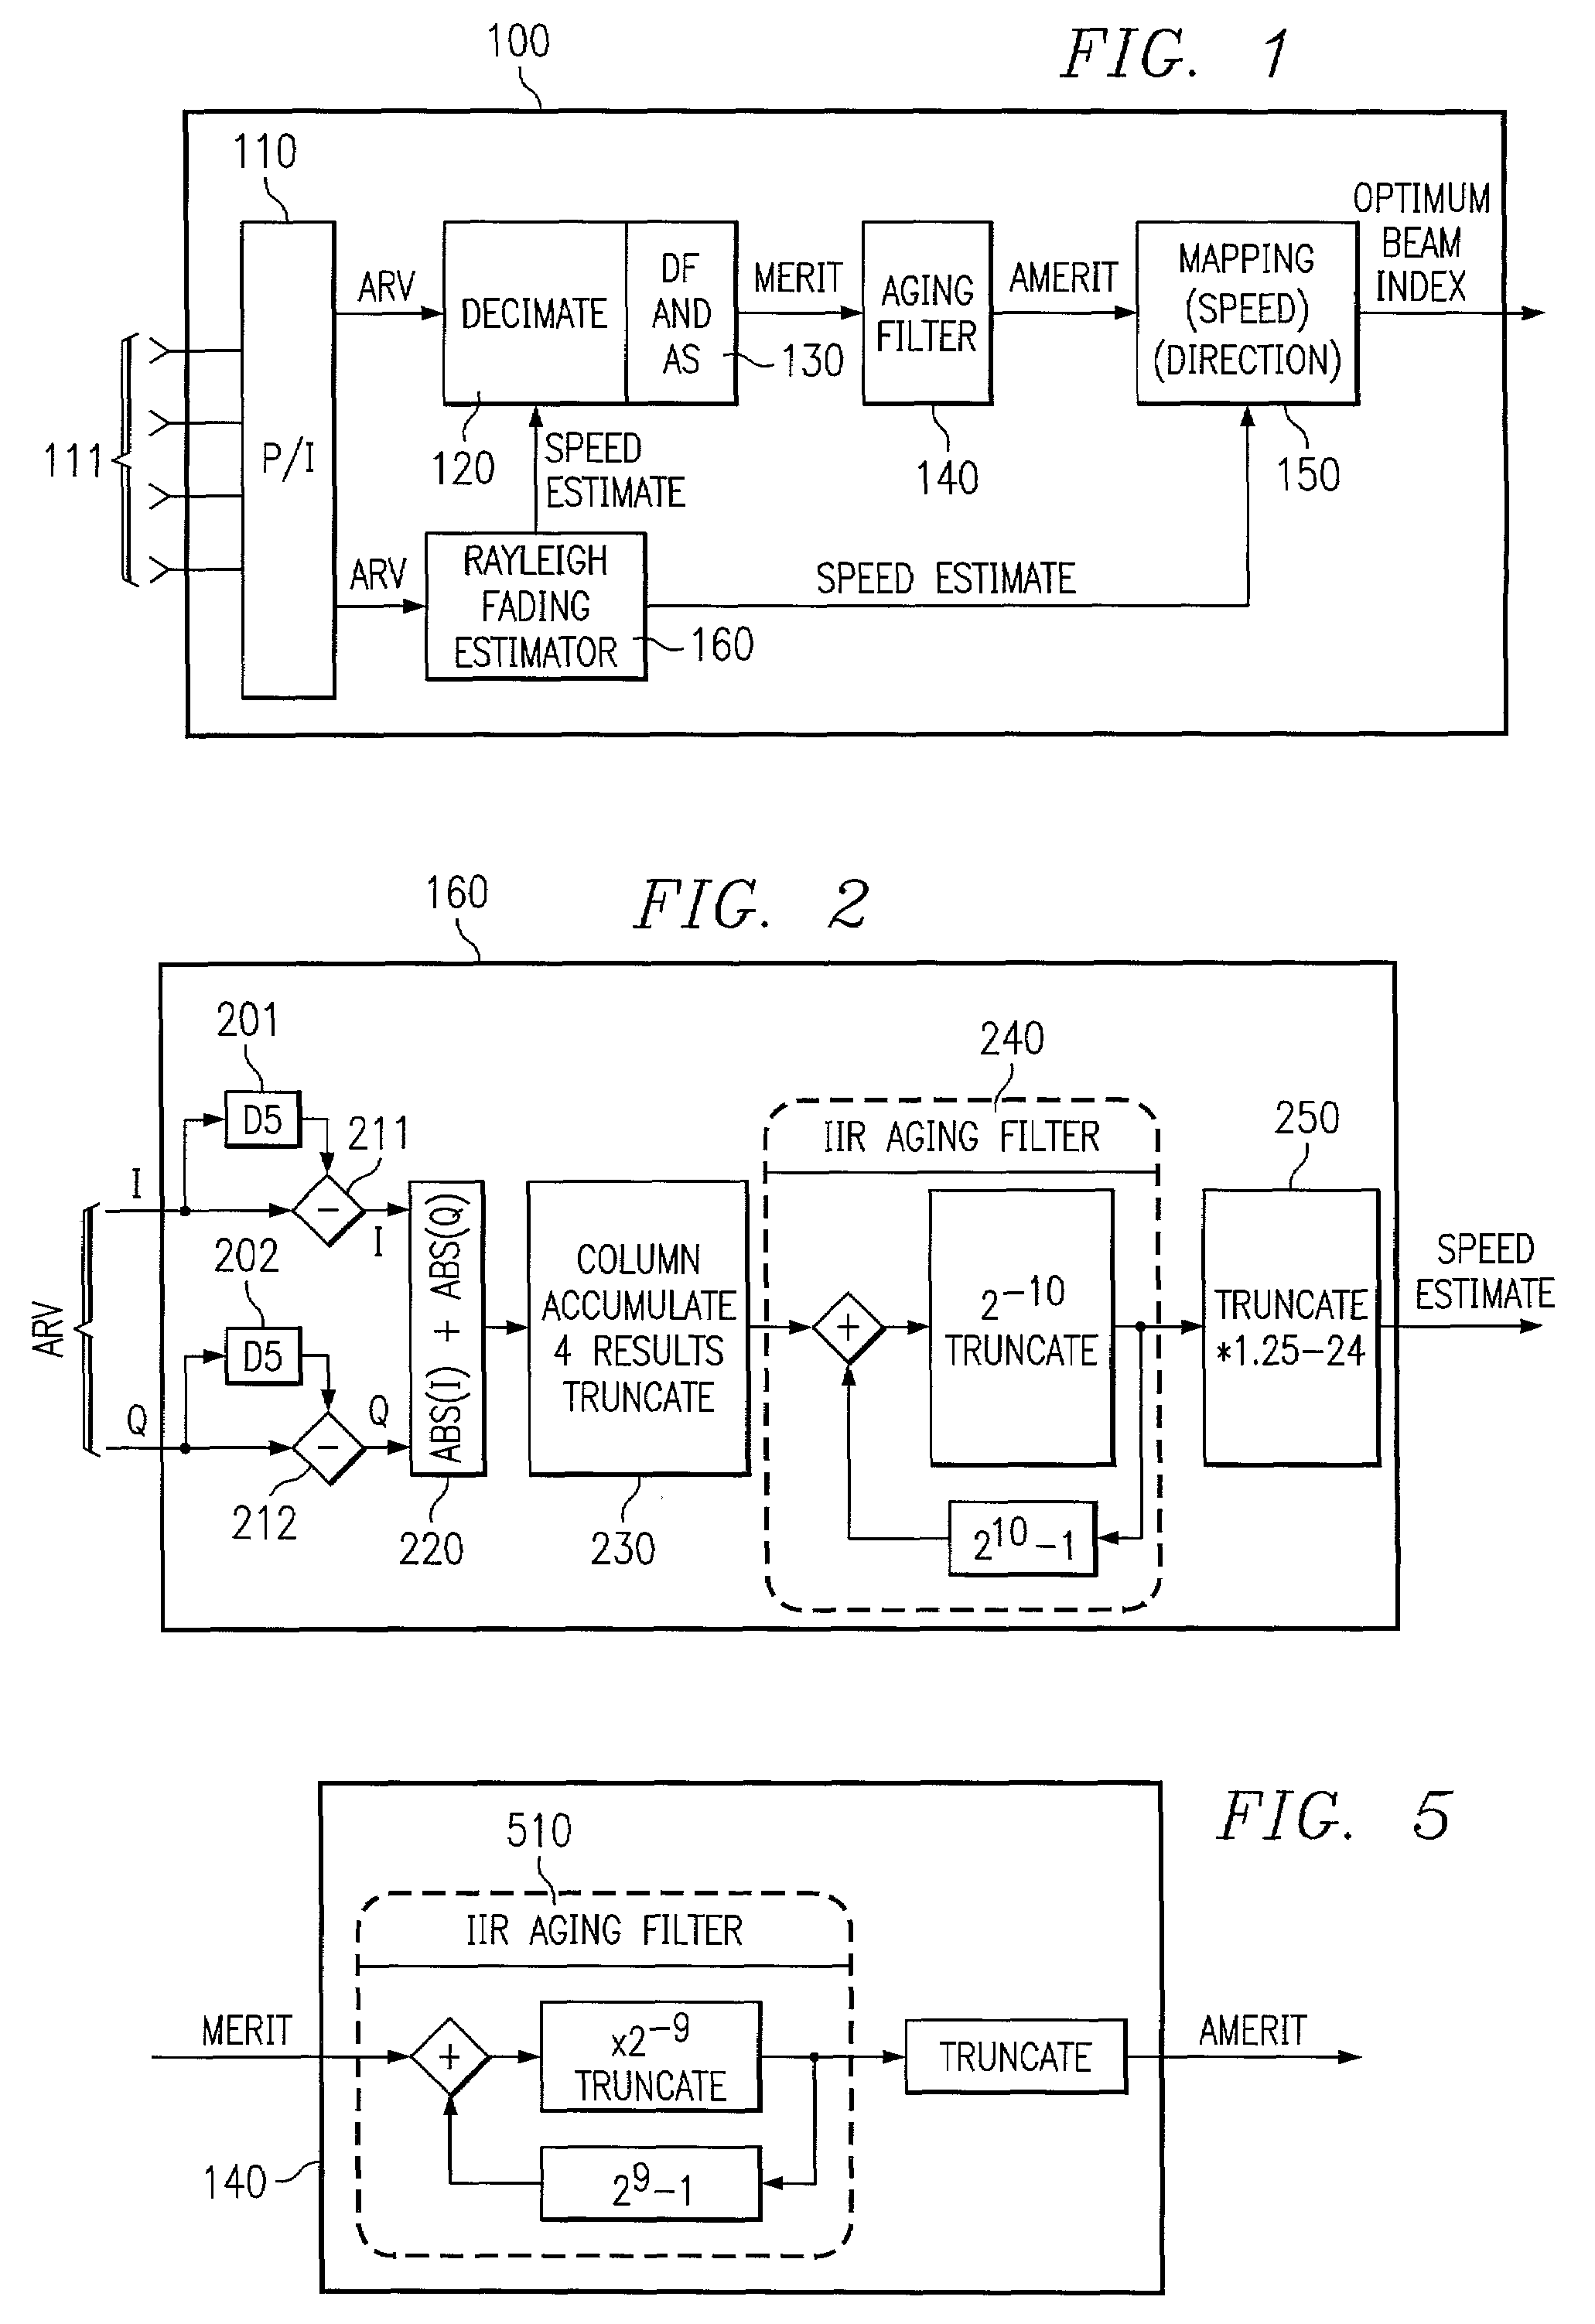 System and method for selecting optimized beam configuration